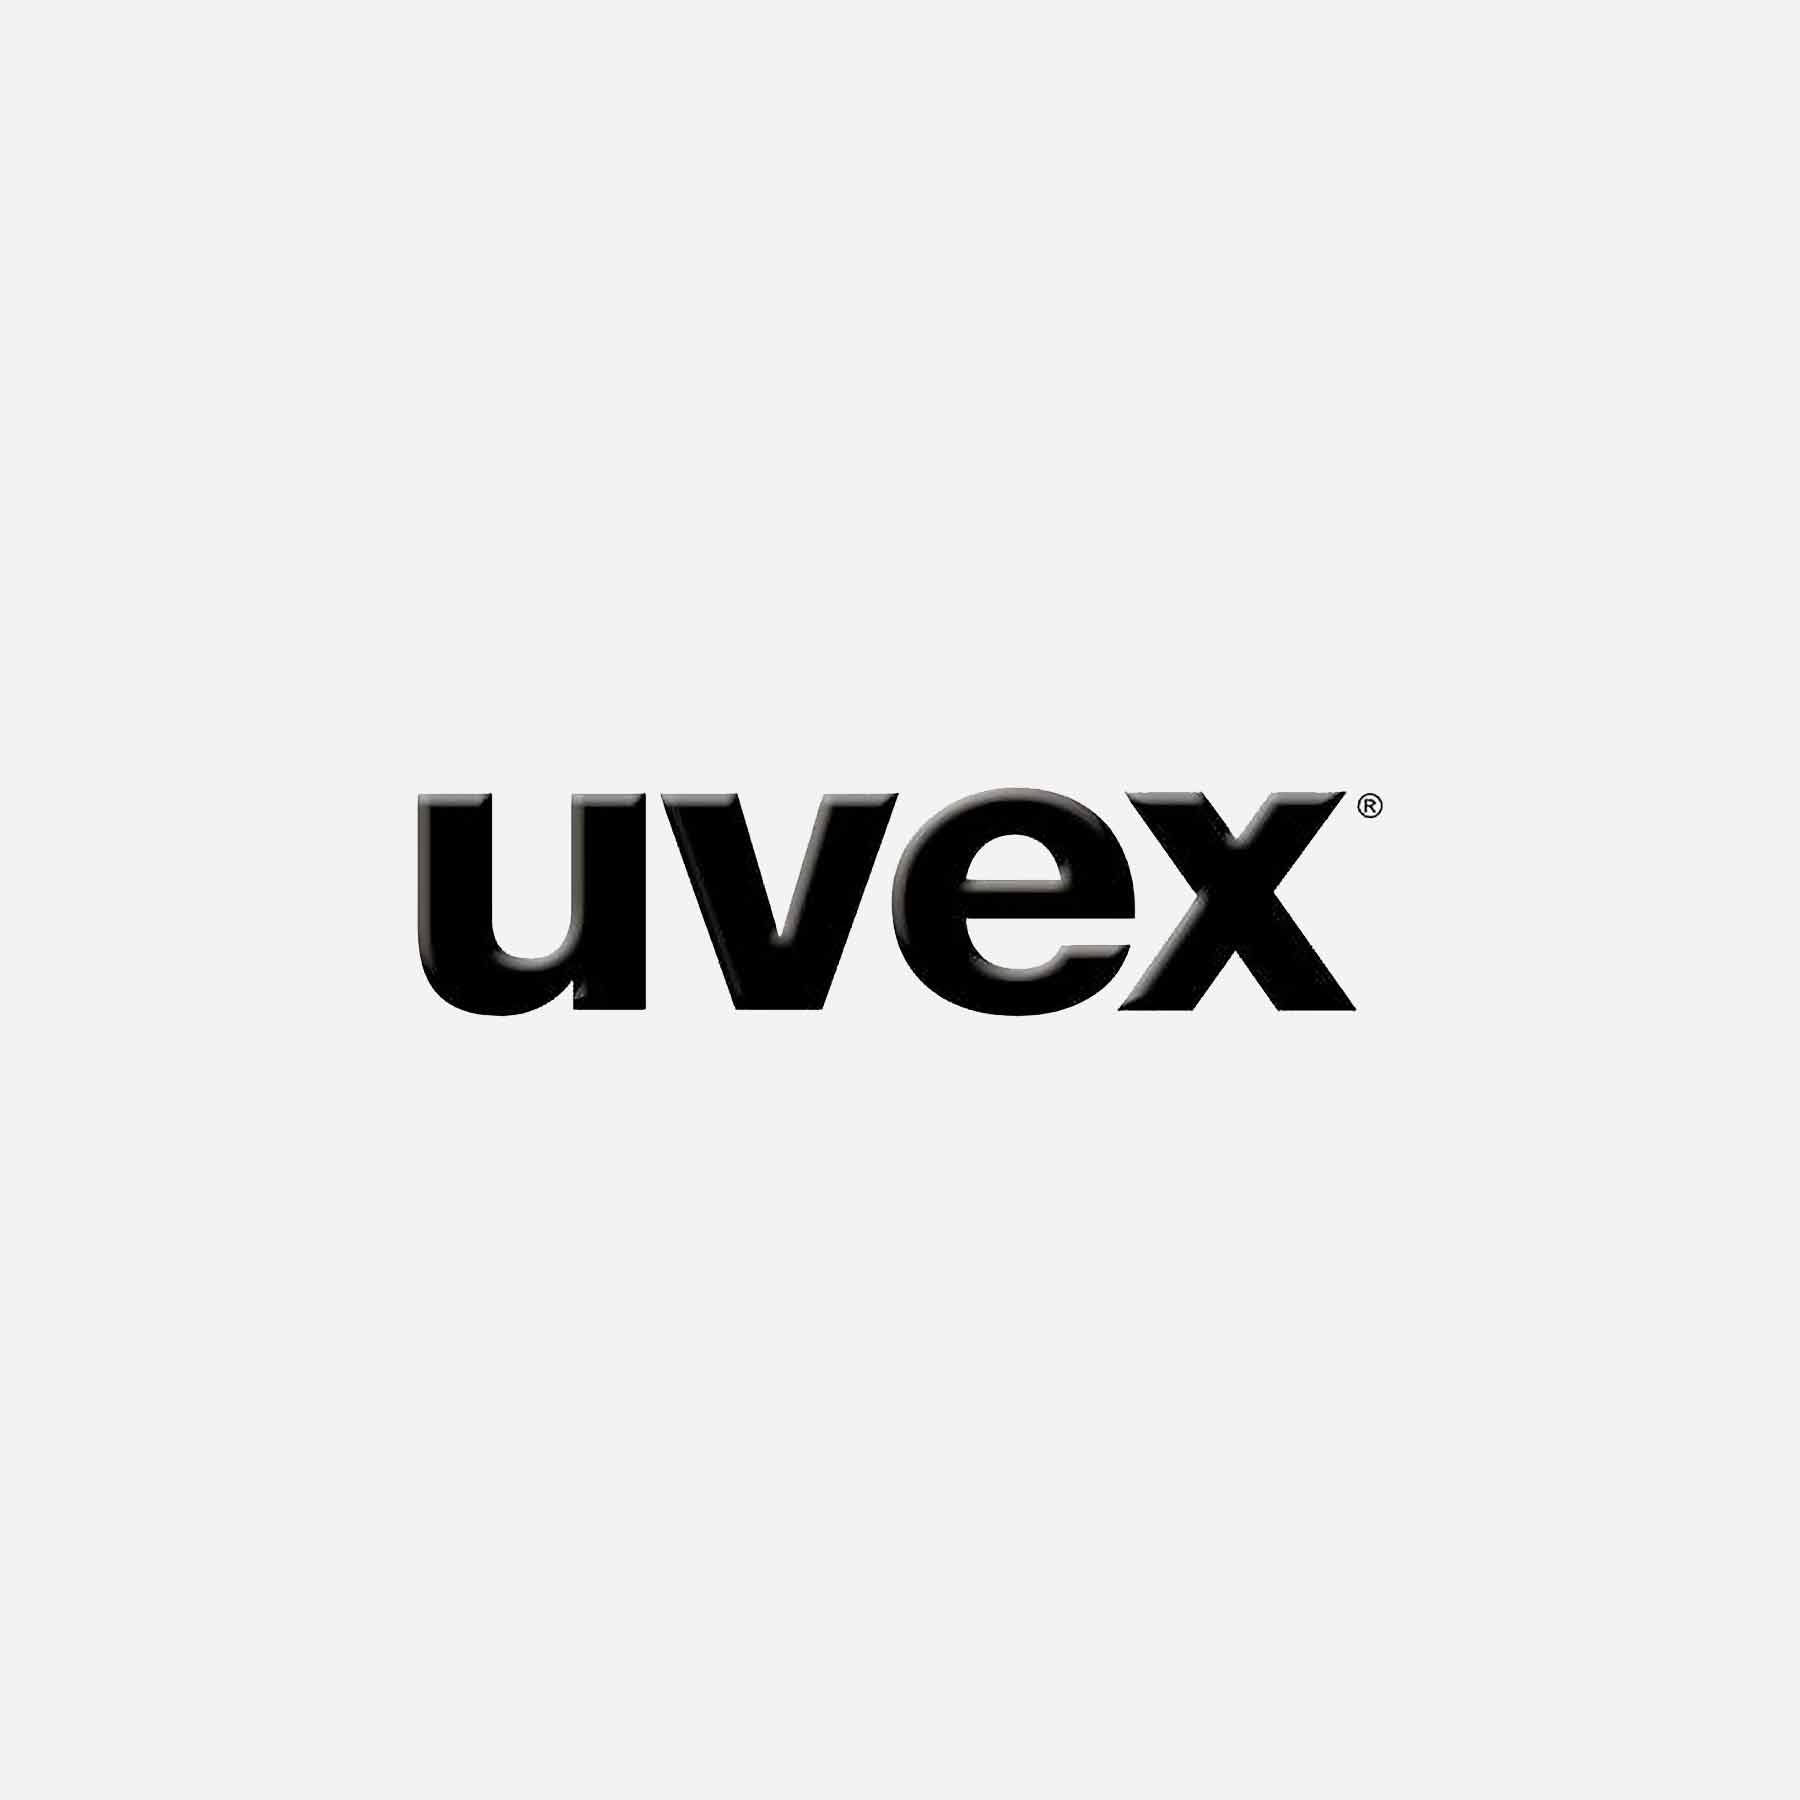 UVEX Exxential II LED